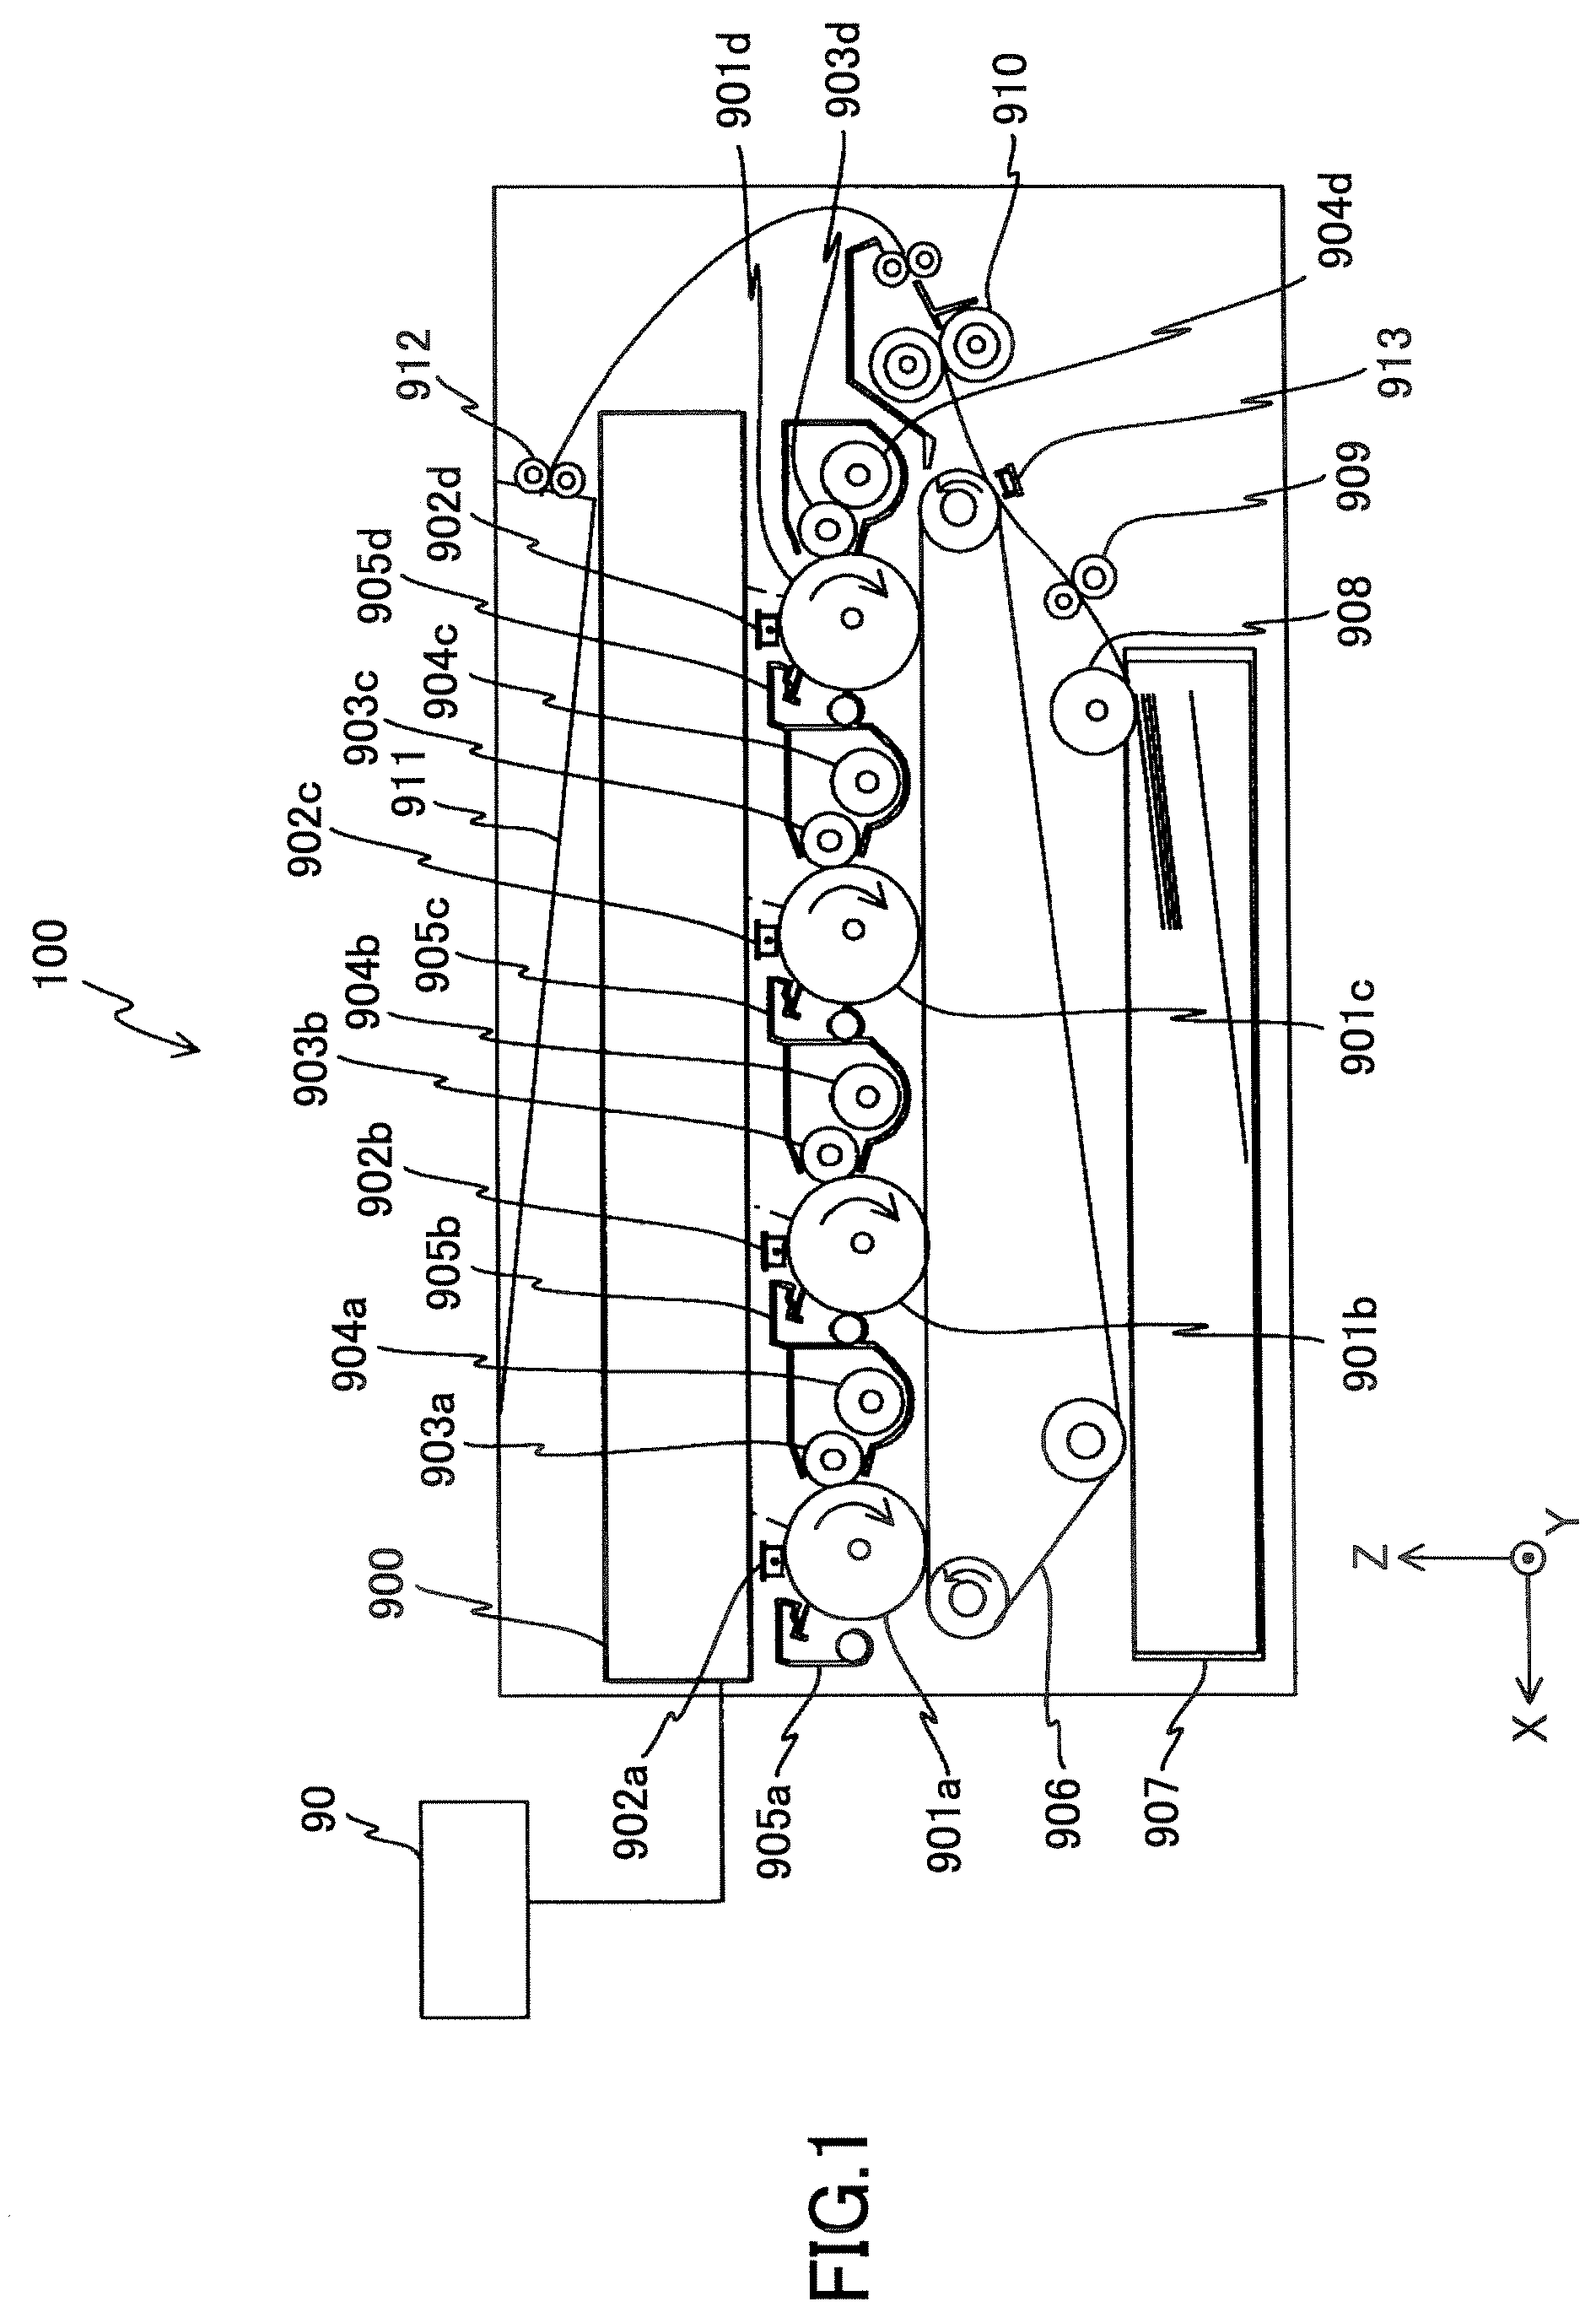 Laser beam scanning device, image forming apparatus, and laser beam detecting method by the laser beam scanning device